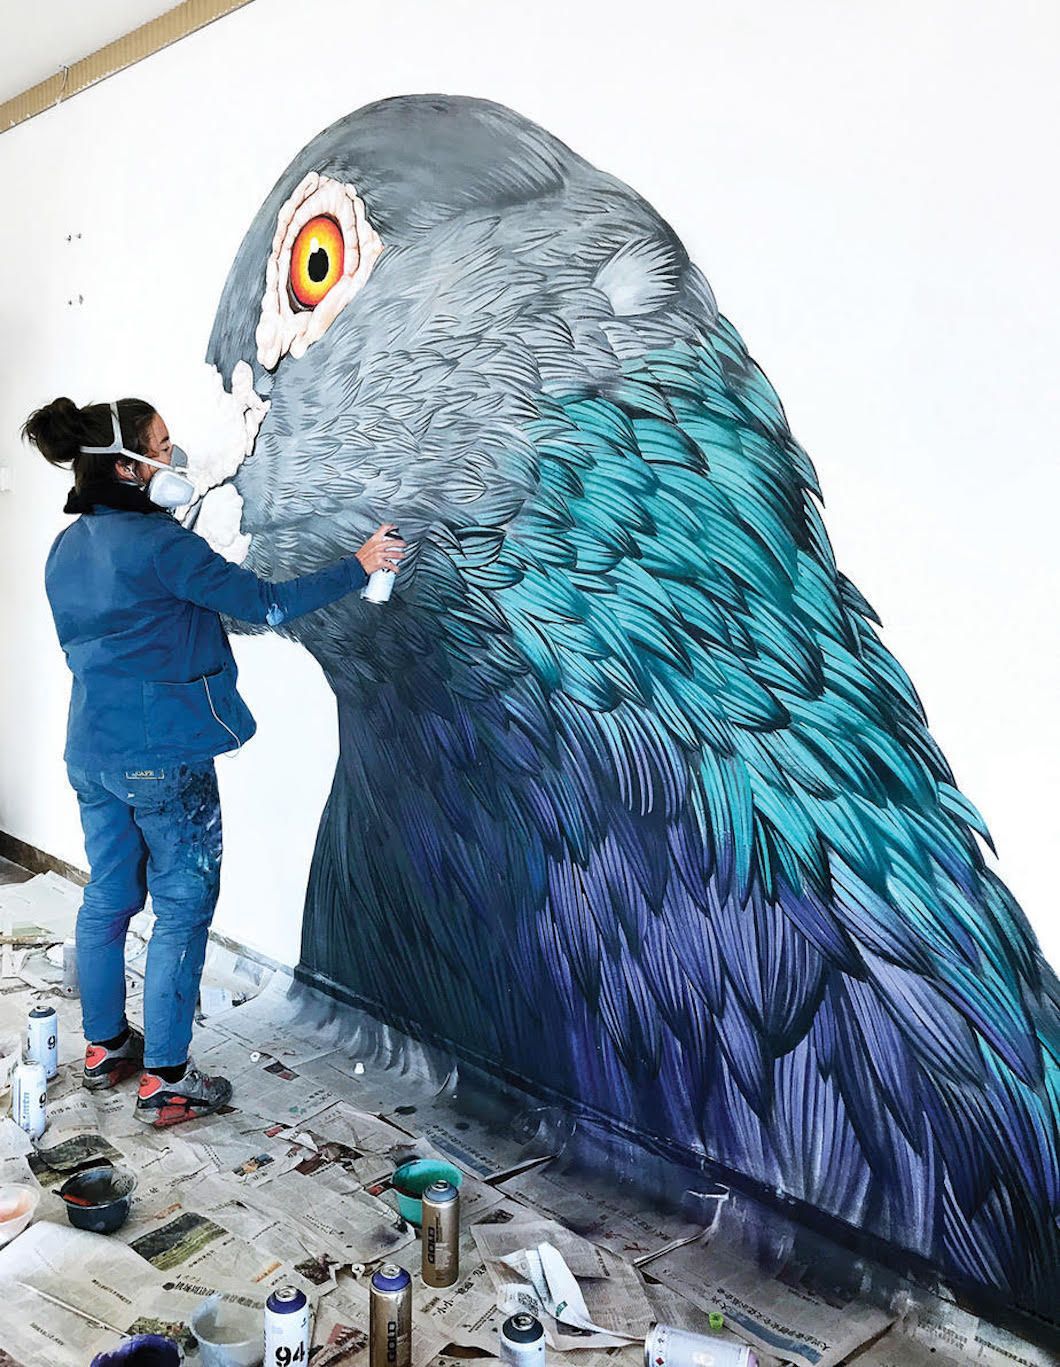 Massive Paintings Of Pigeons Reveal The Street Birds' Unexpected Beauty |  Arte De Aves, Arte Mural, Murales Pertaining To Pigeon Wall Art (View 13 of 15)